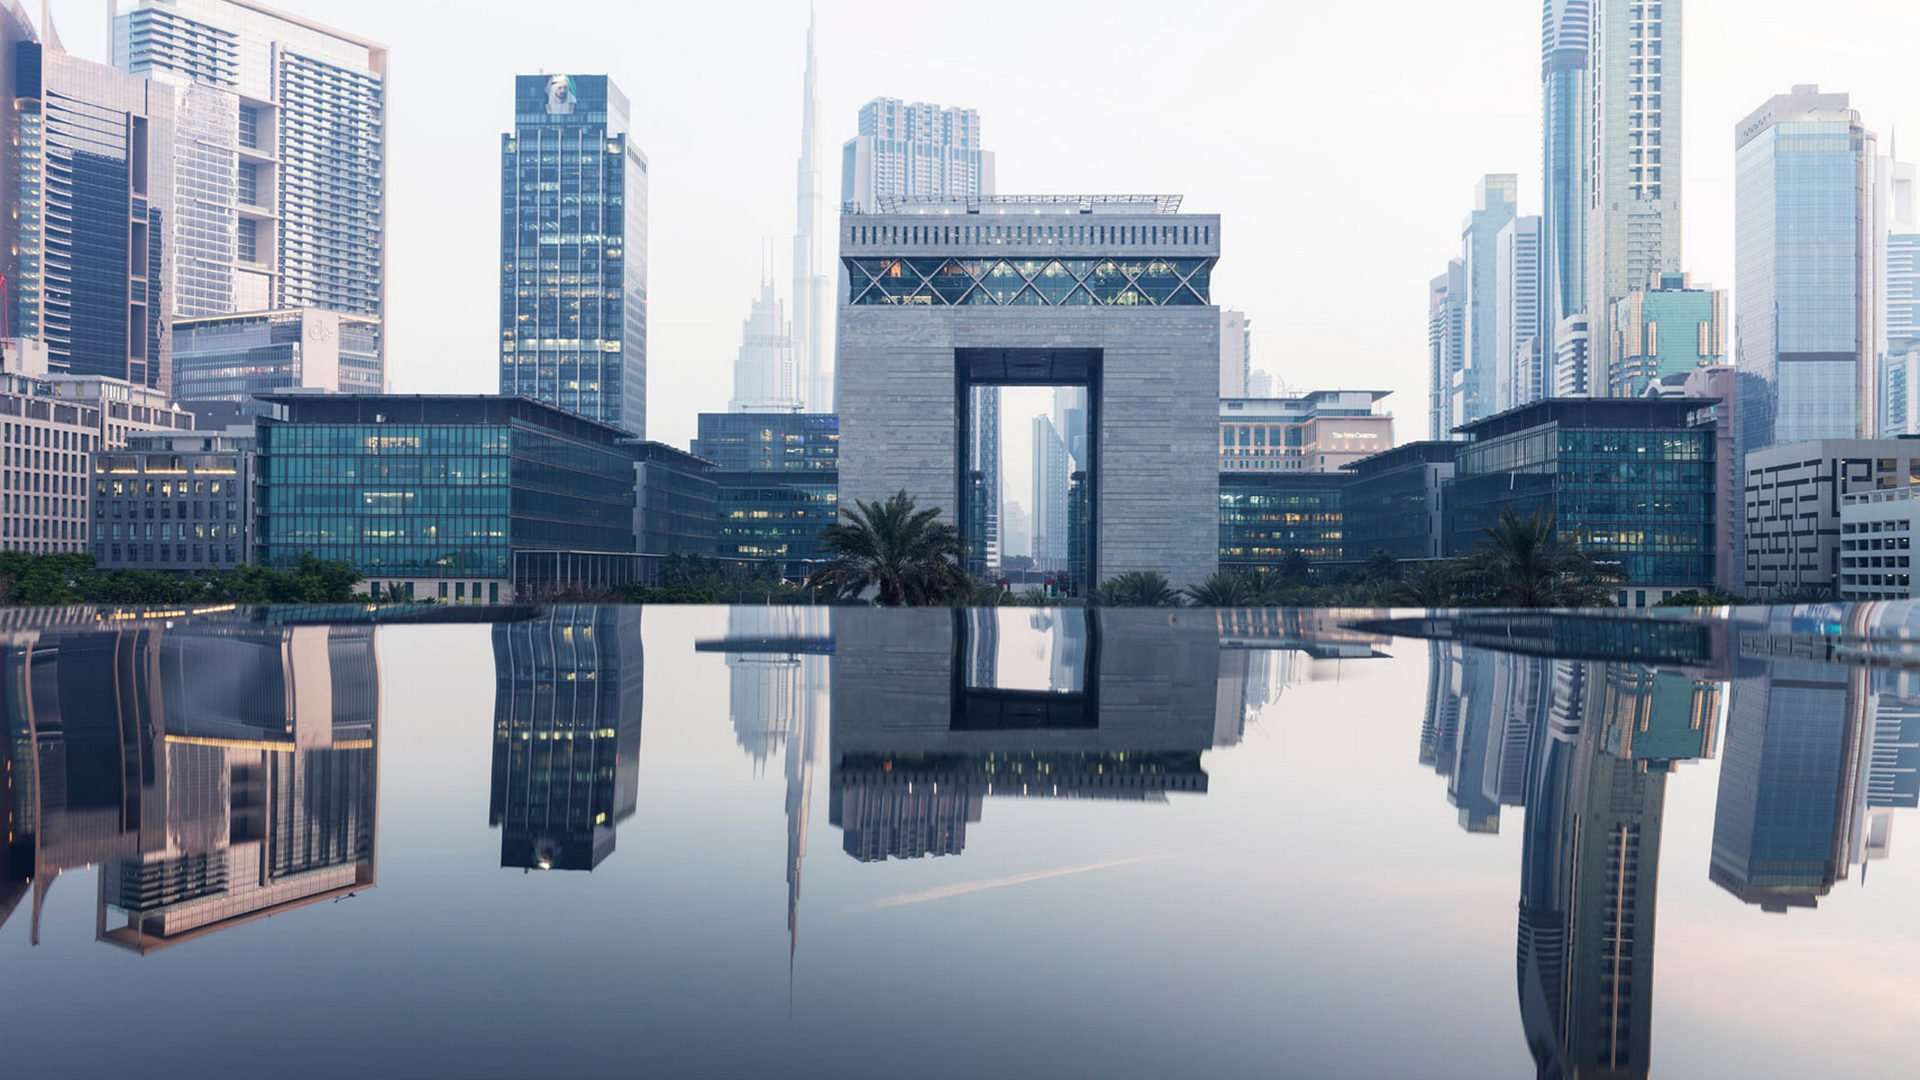 DIFC – THE DEFAULT “INITIAL” SEAT